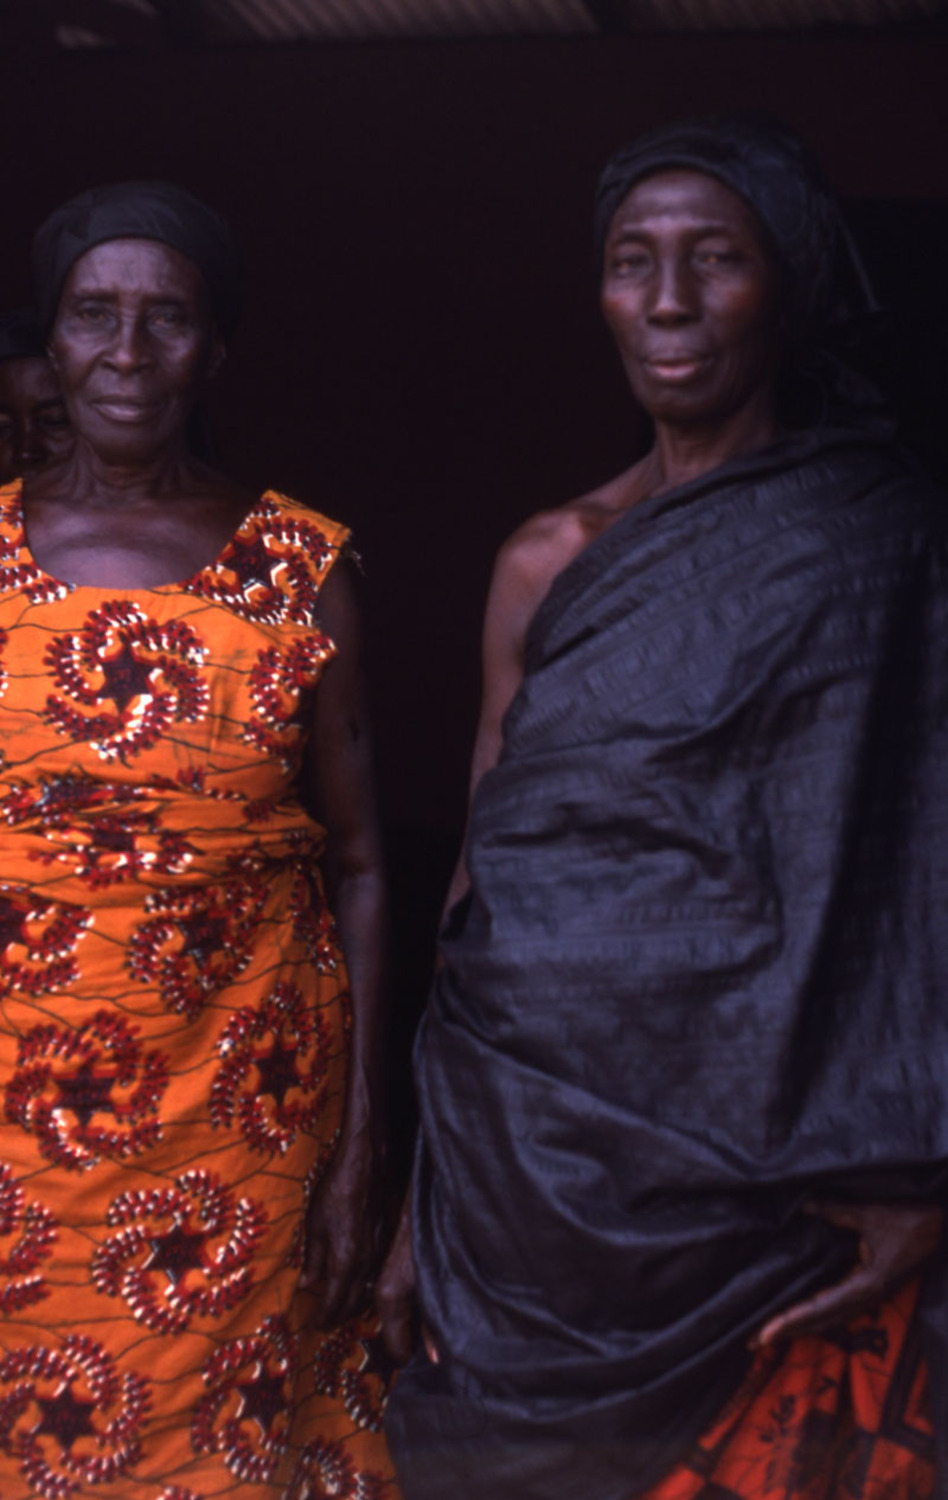 Two older women standing in funeral cloth